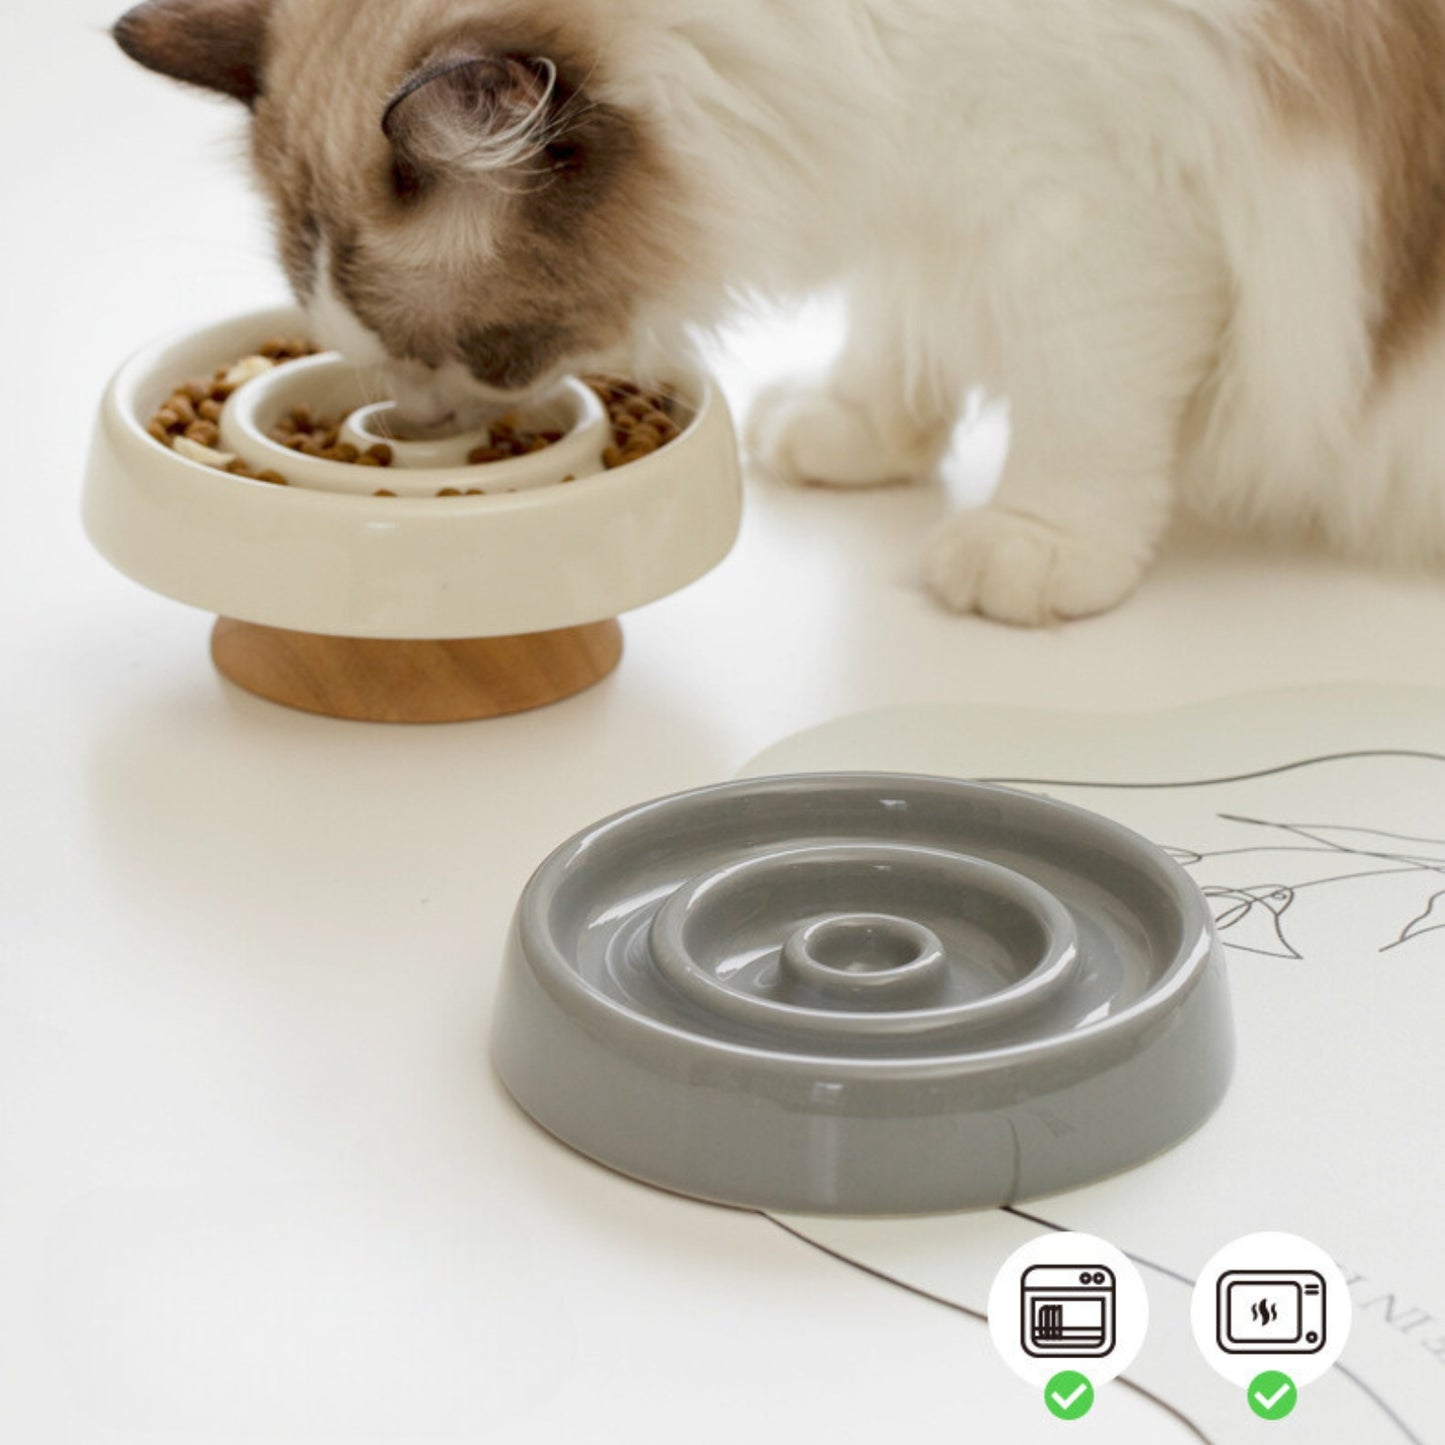 Ceramic Slow Eating Pet Food Bowl for Cats and Dogs